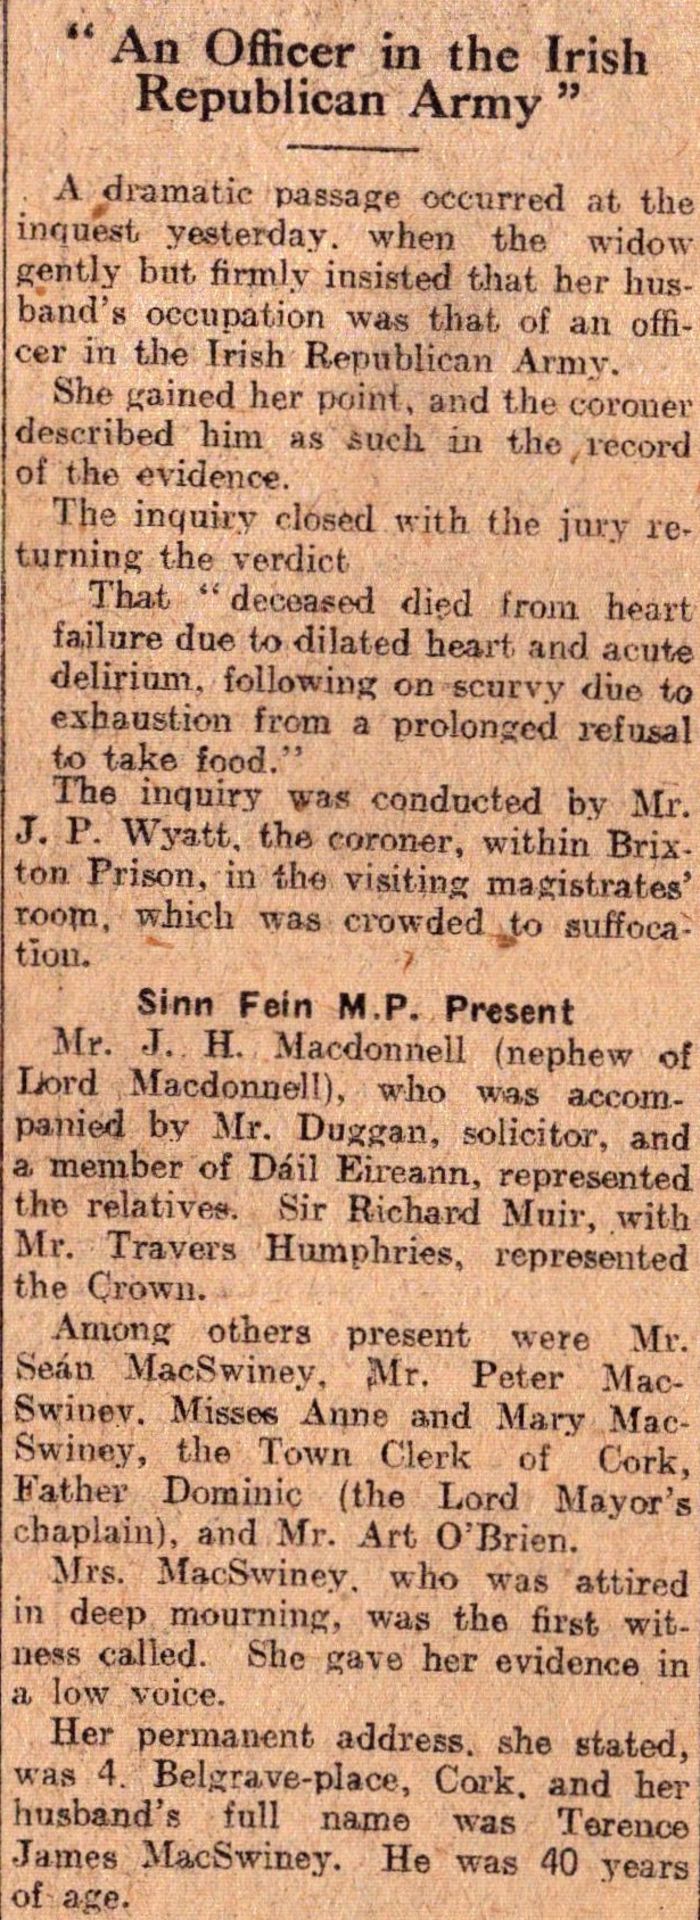 Irish War of Independence News Reports Black & Tans, Hunger Strikes 1920-13. - Image 3 of 5